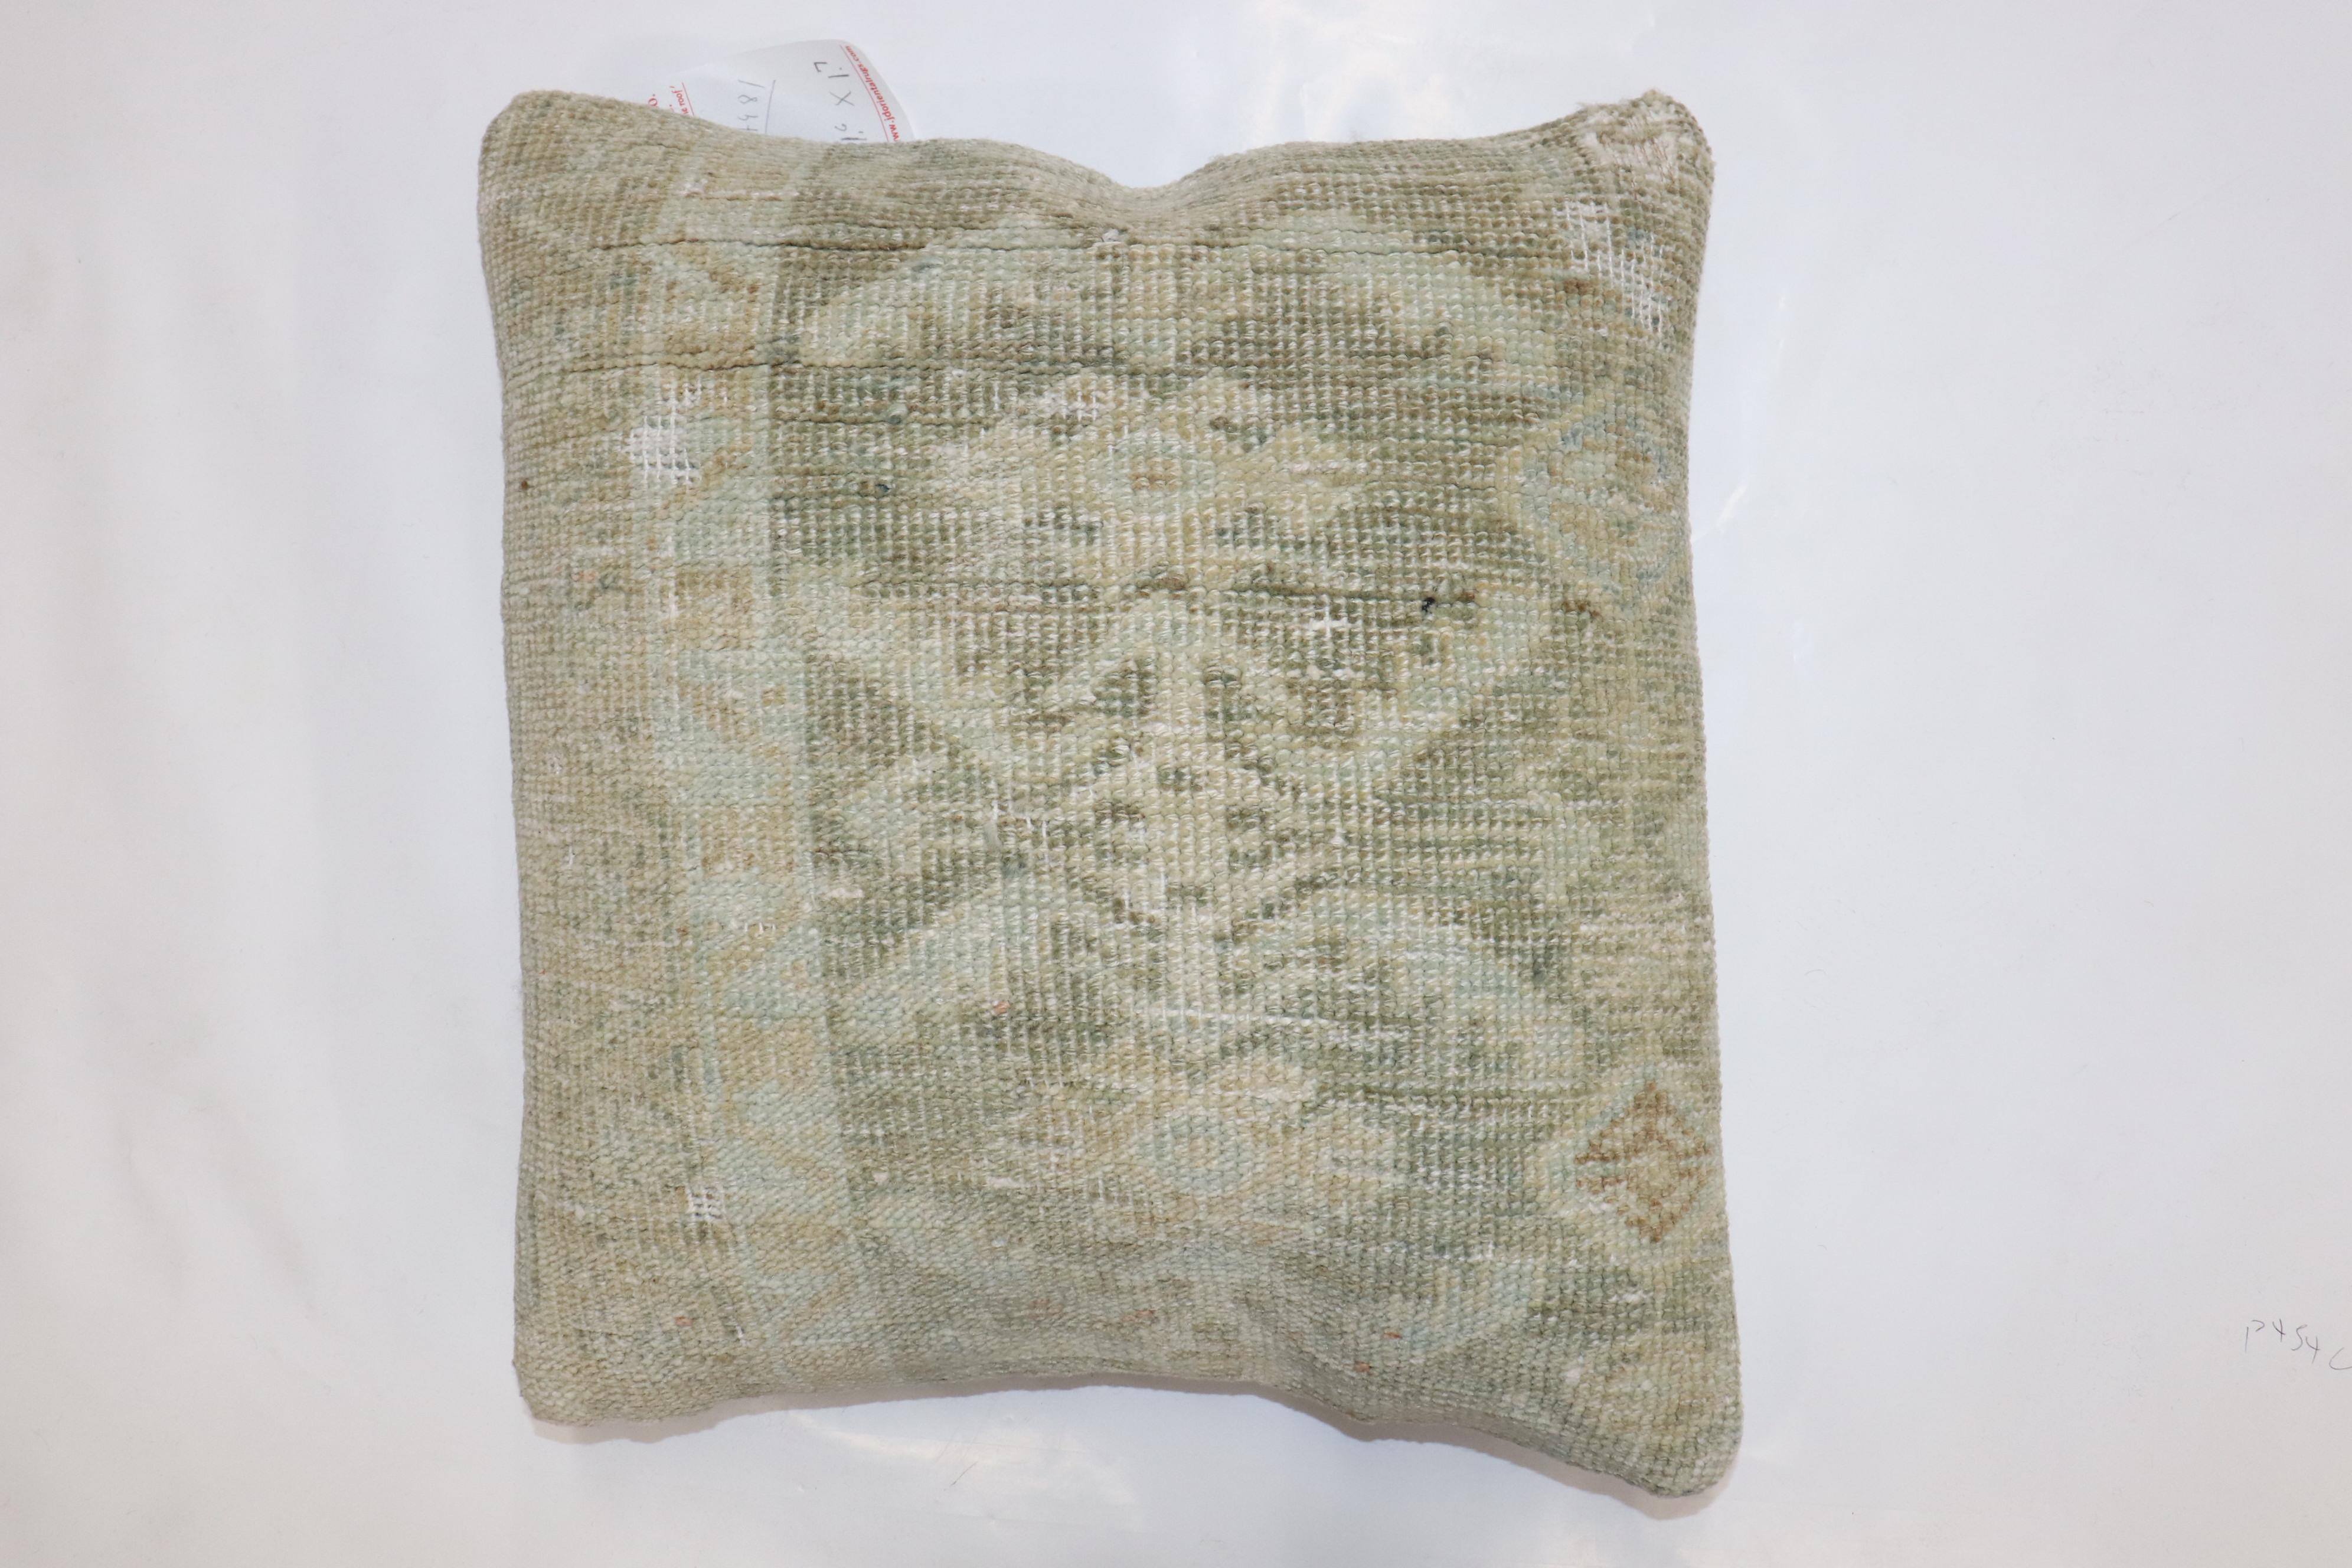 Pillow made from an antique Persian Malayer rug in pale green

Measures: 18'' x 19''.